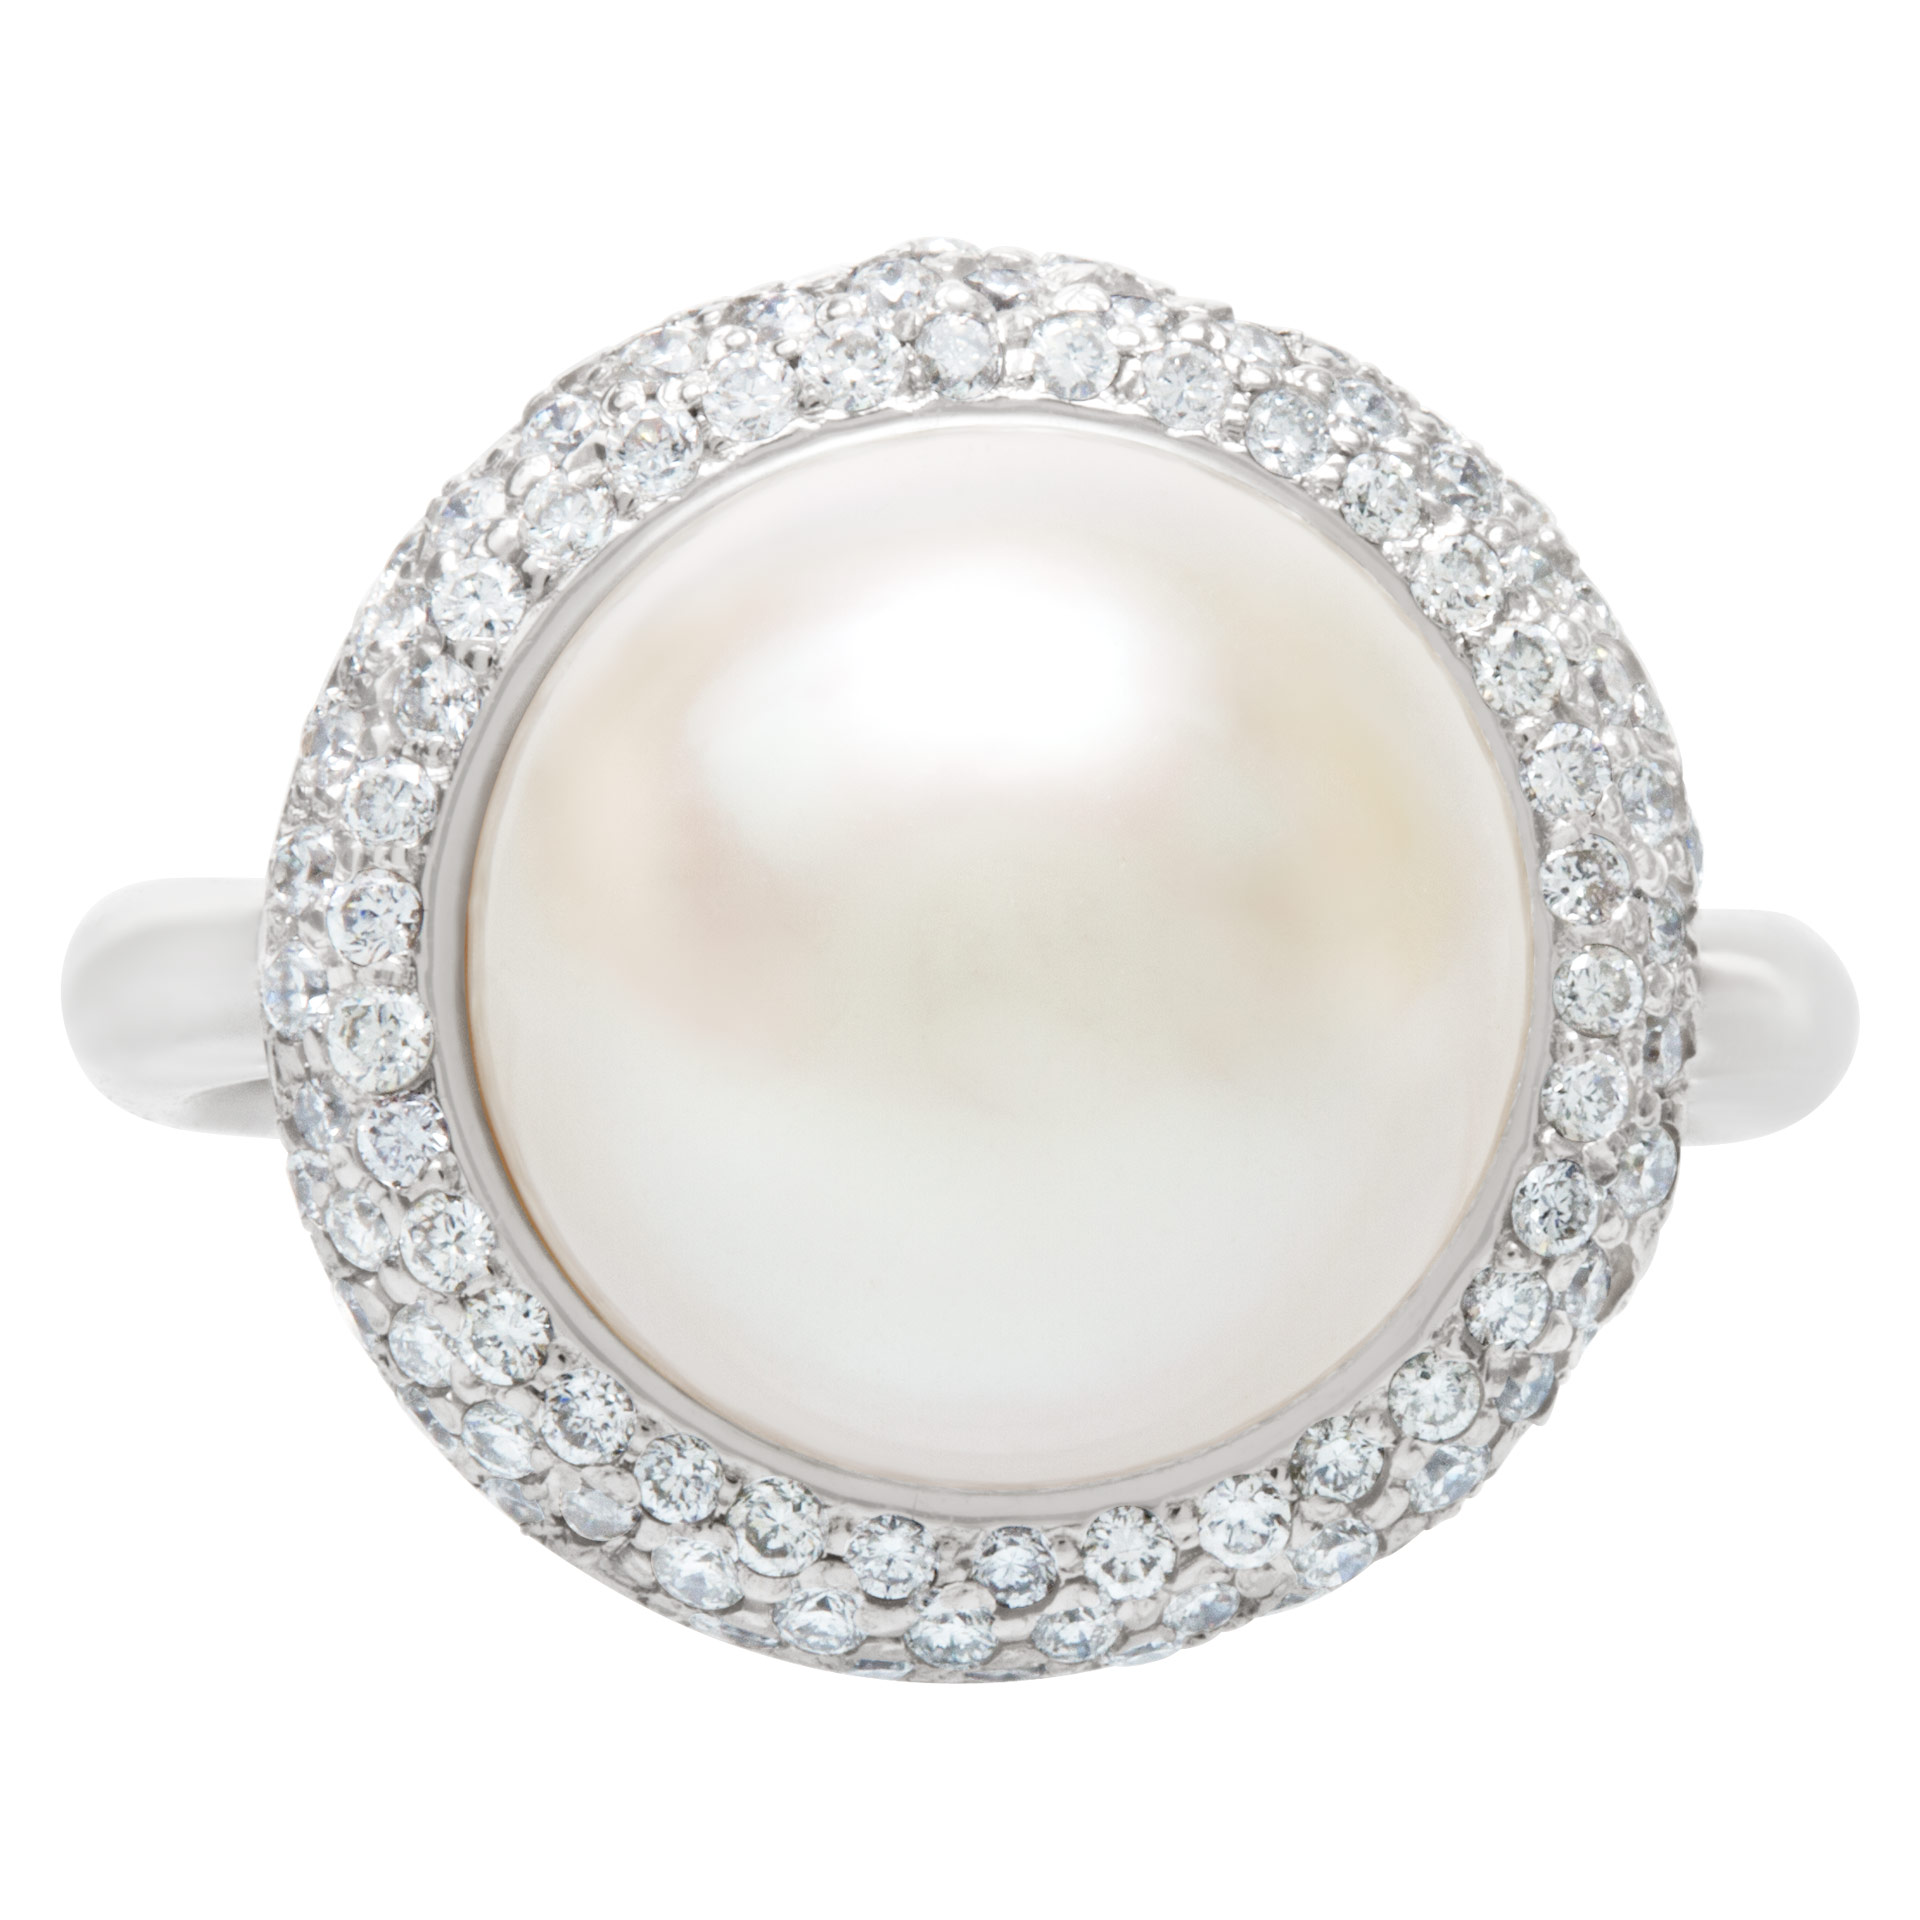 South Sea pearl (11.5 x 12mm) & diamonds ring in 18K white gold.